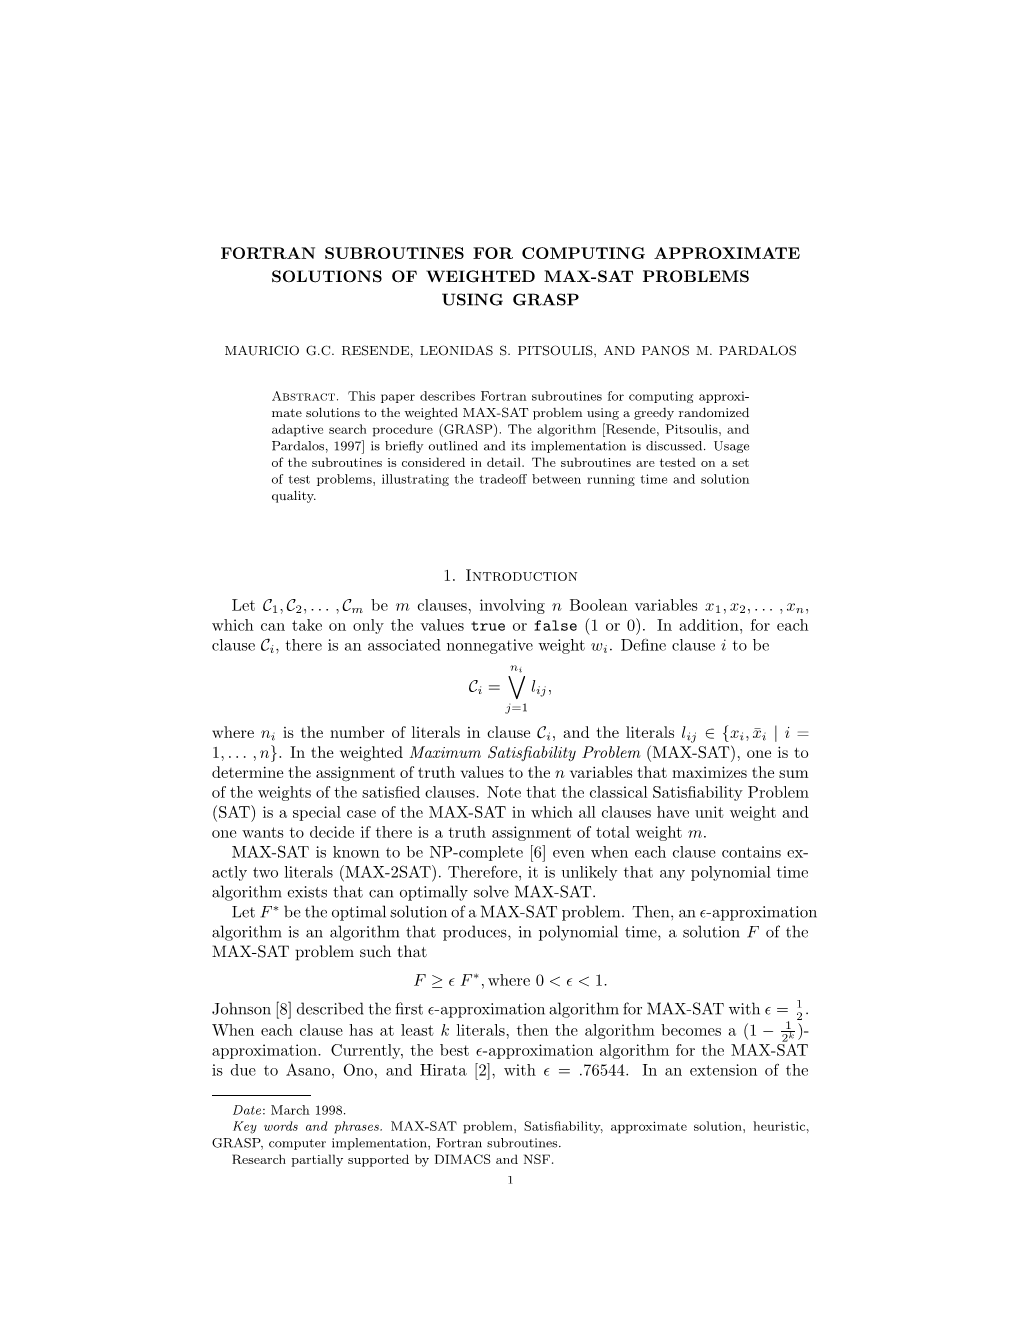 Fortran Subroutines for Computing Approximate Solutions of Weighted Max-Sat Problems Using Grasp